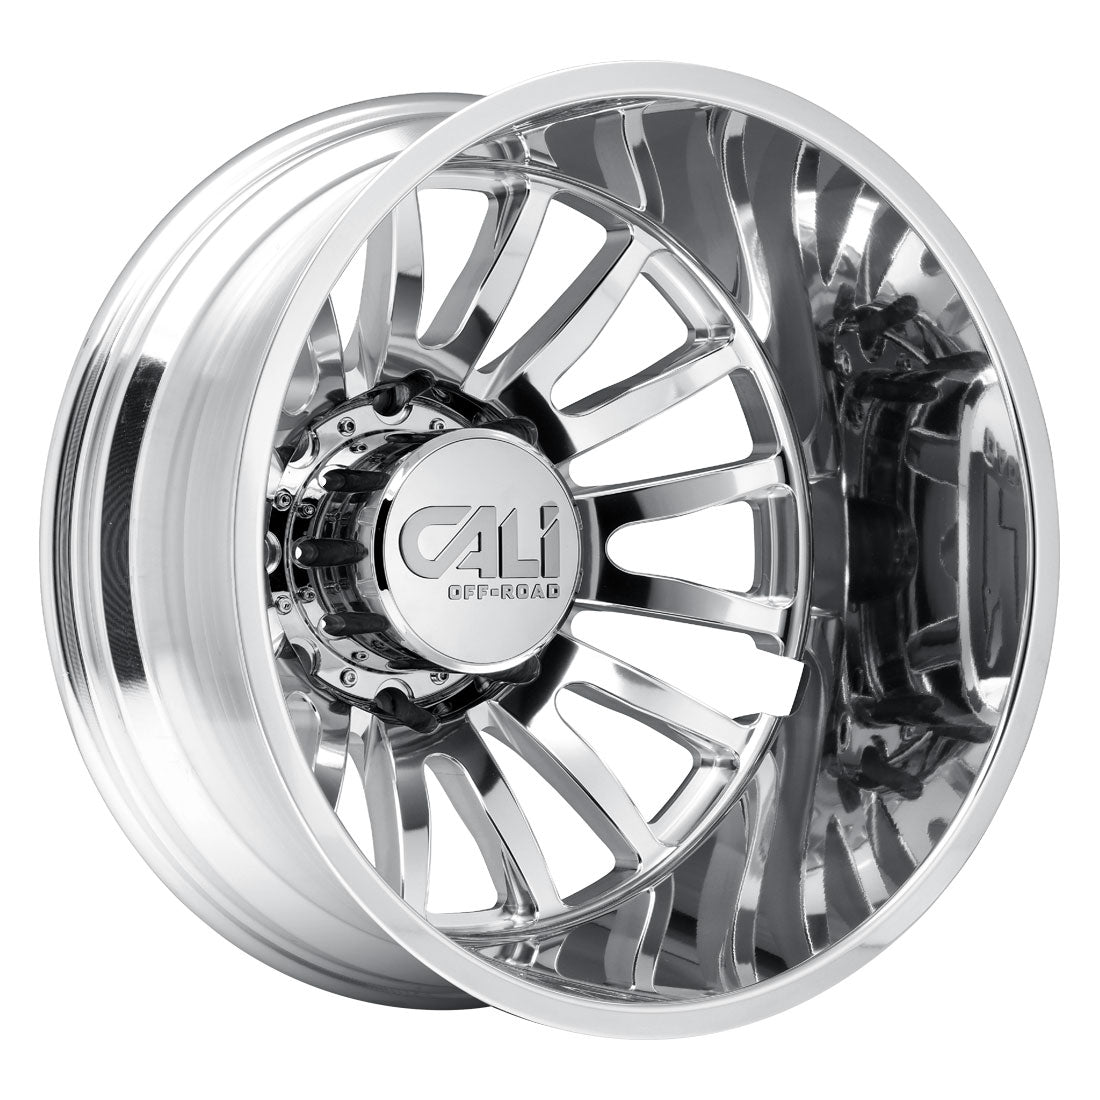 Summit 9110D Polished Traditional Front Open Country R/T 35X12.50R20 (34.8 x 12.50)